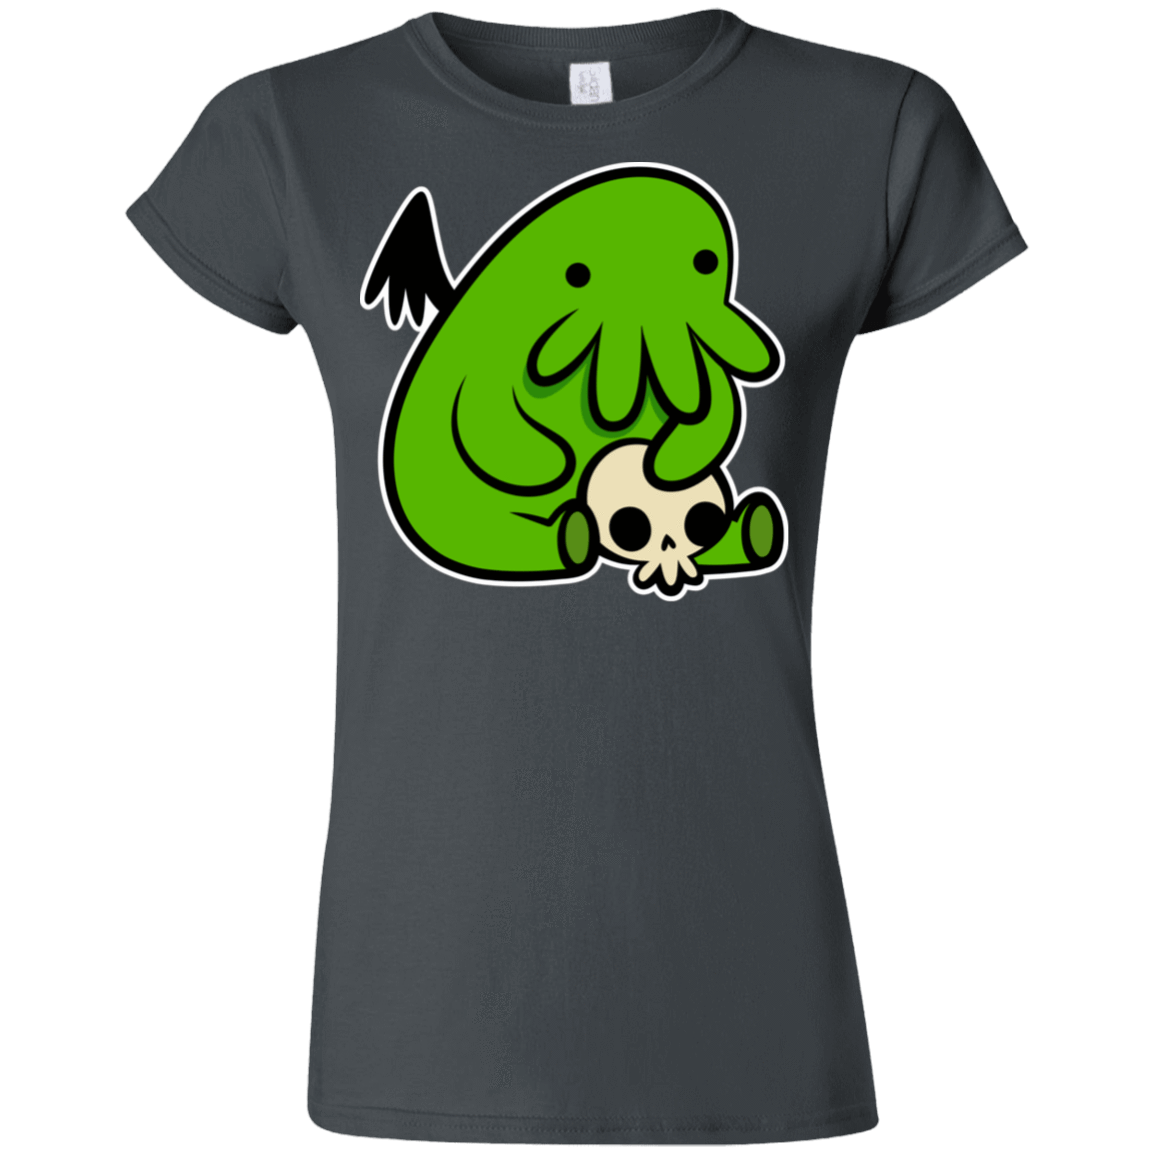 T-Shirts Charcoal / S Baby Cthulhu Junior Slimmer-Fit T-Shirt